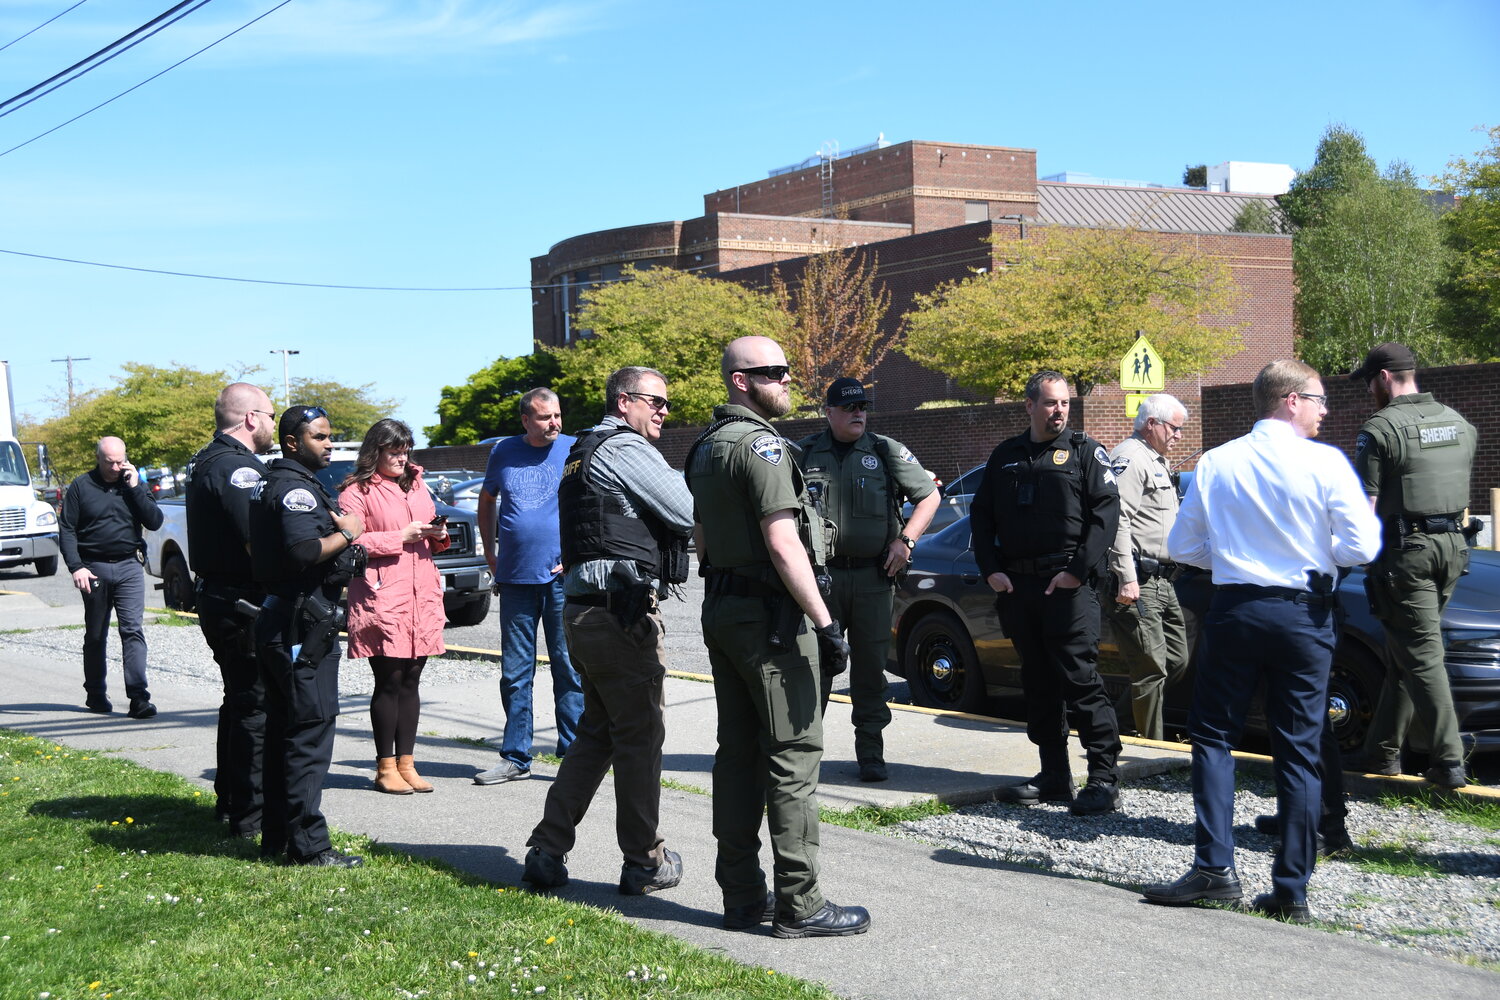 Law enforcement members with the Washington State Patrol, Port Townsend Police Department, and Jefferson County Sheriff's Office stand with Port Townsend School District officials outside Port Townsend High School prior to lifting the lockdown.